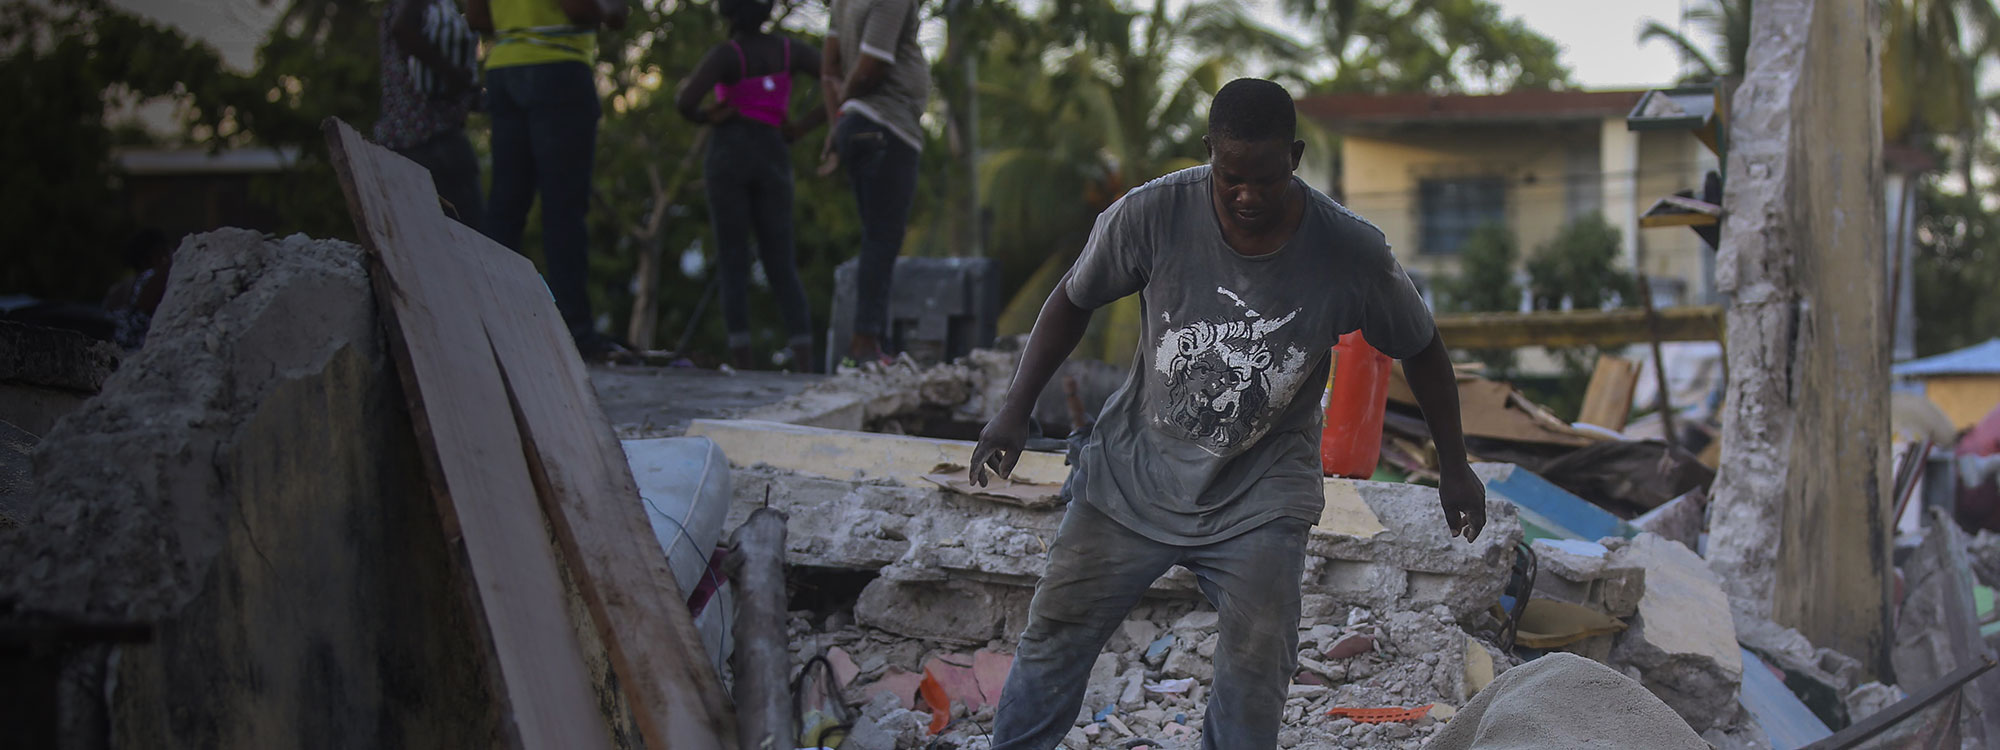 Earthquake, Les Cayes, Haiti 14-Aug-2021. Man tries to recover belongings from his home destroyed by the earthquake. Joseph Odelyn AP Shutterstock